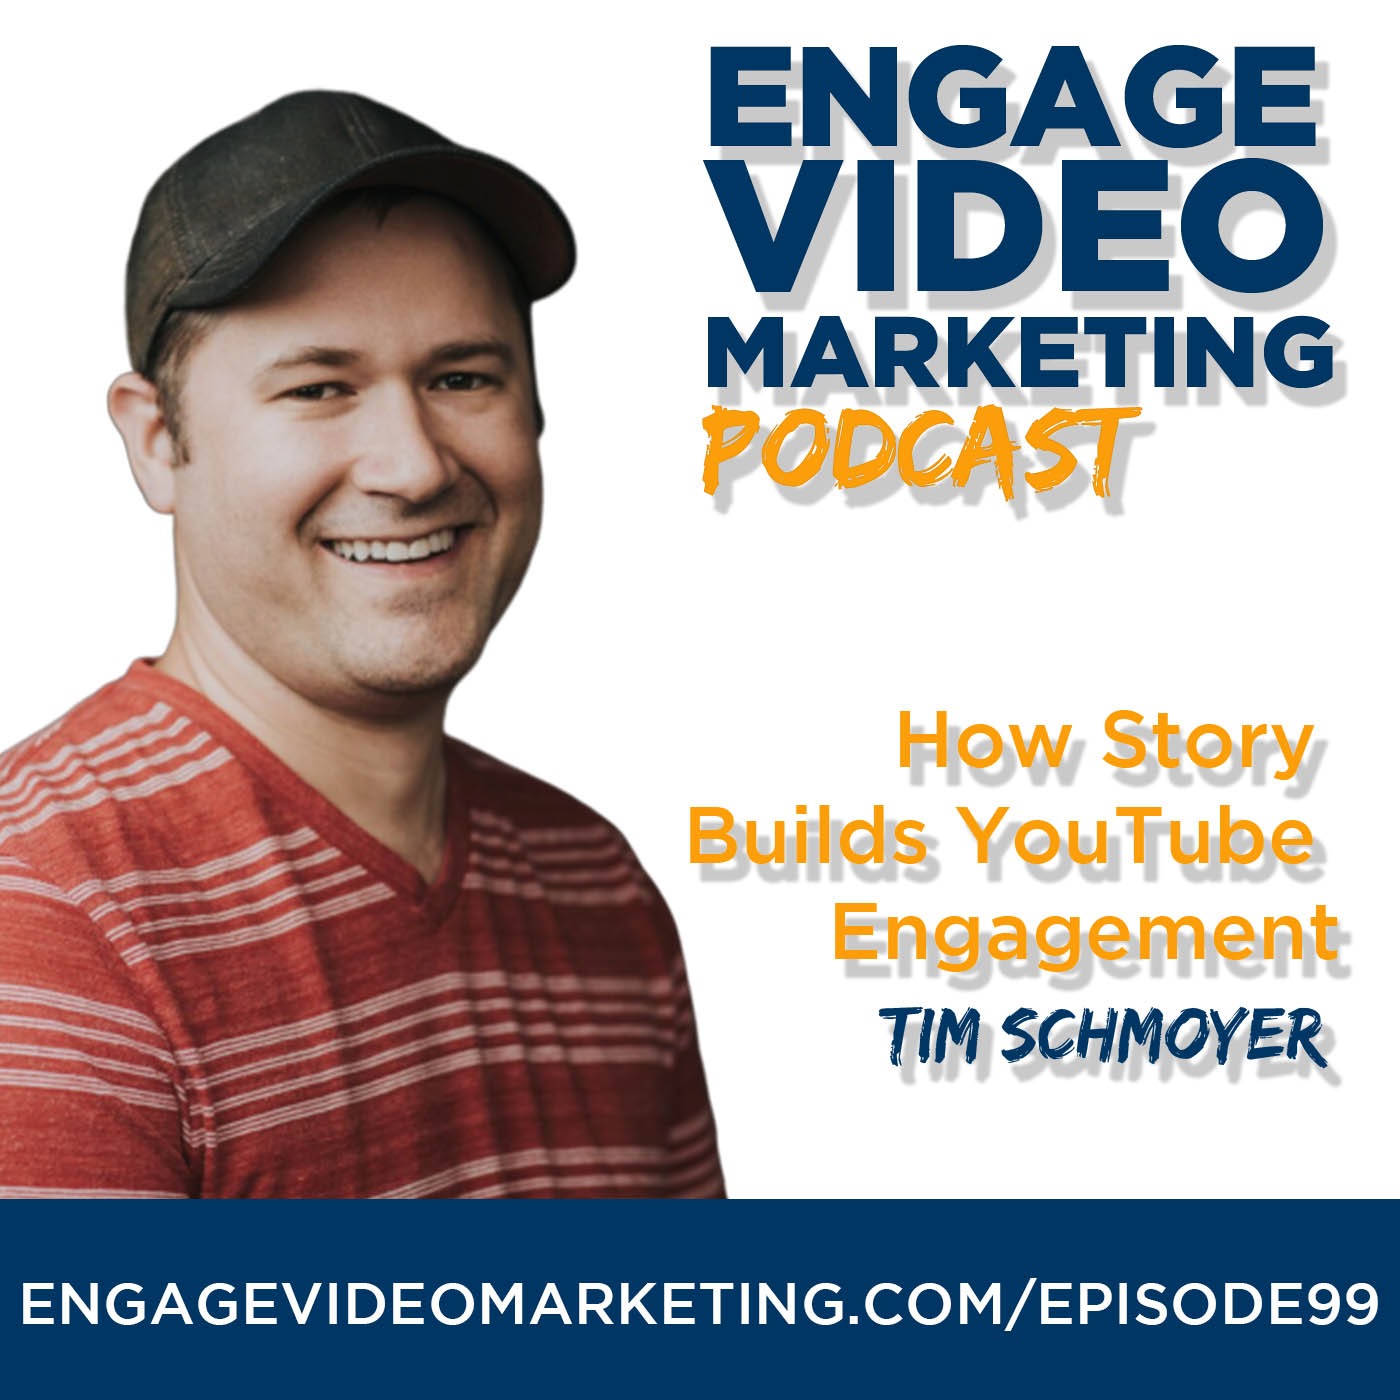 How Story Builds YouTube Engagement with Tim Schmoyer